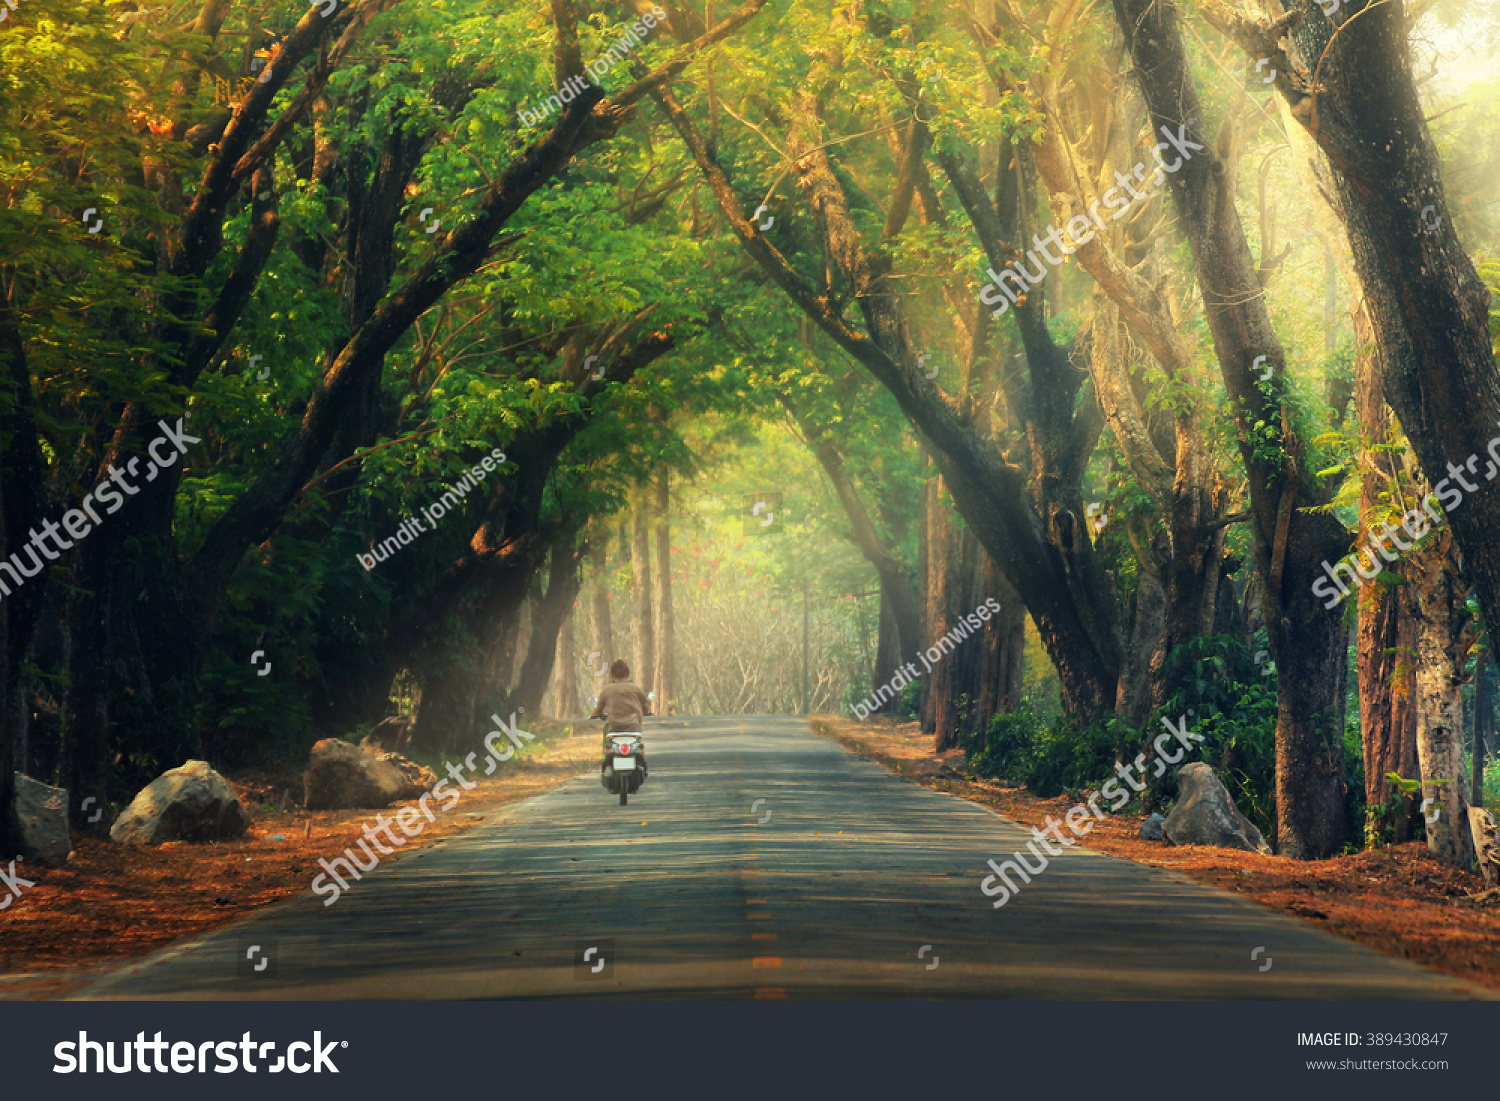 Abstract Background Route Journey Amidst Big Stock Photo 389430847